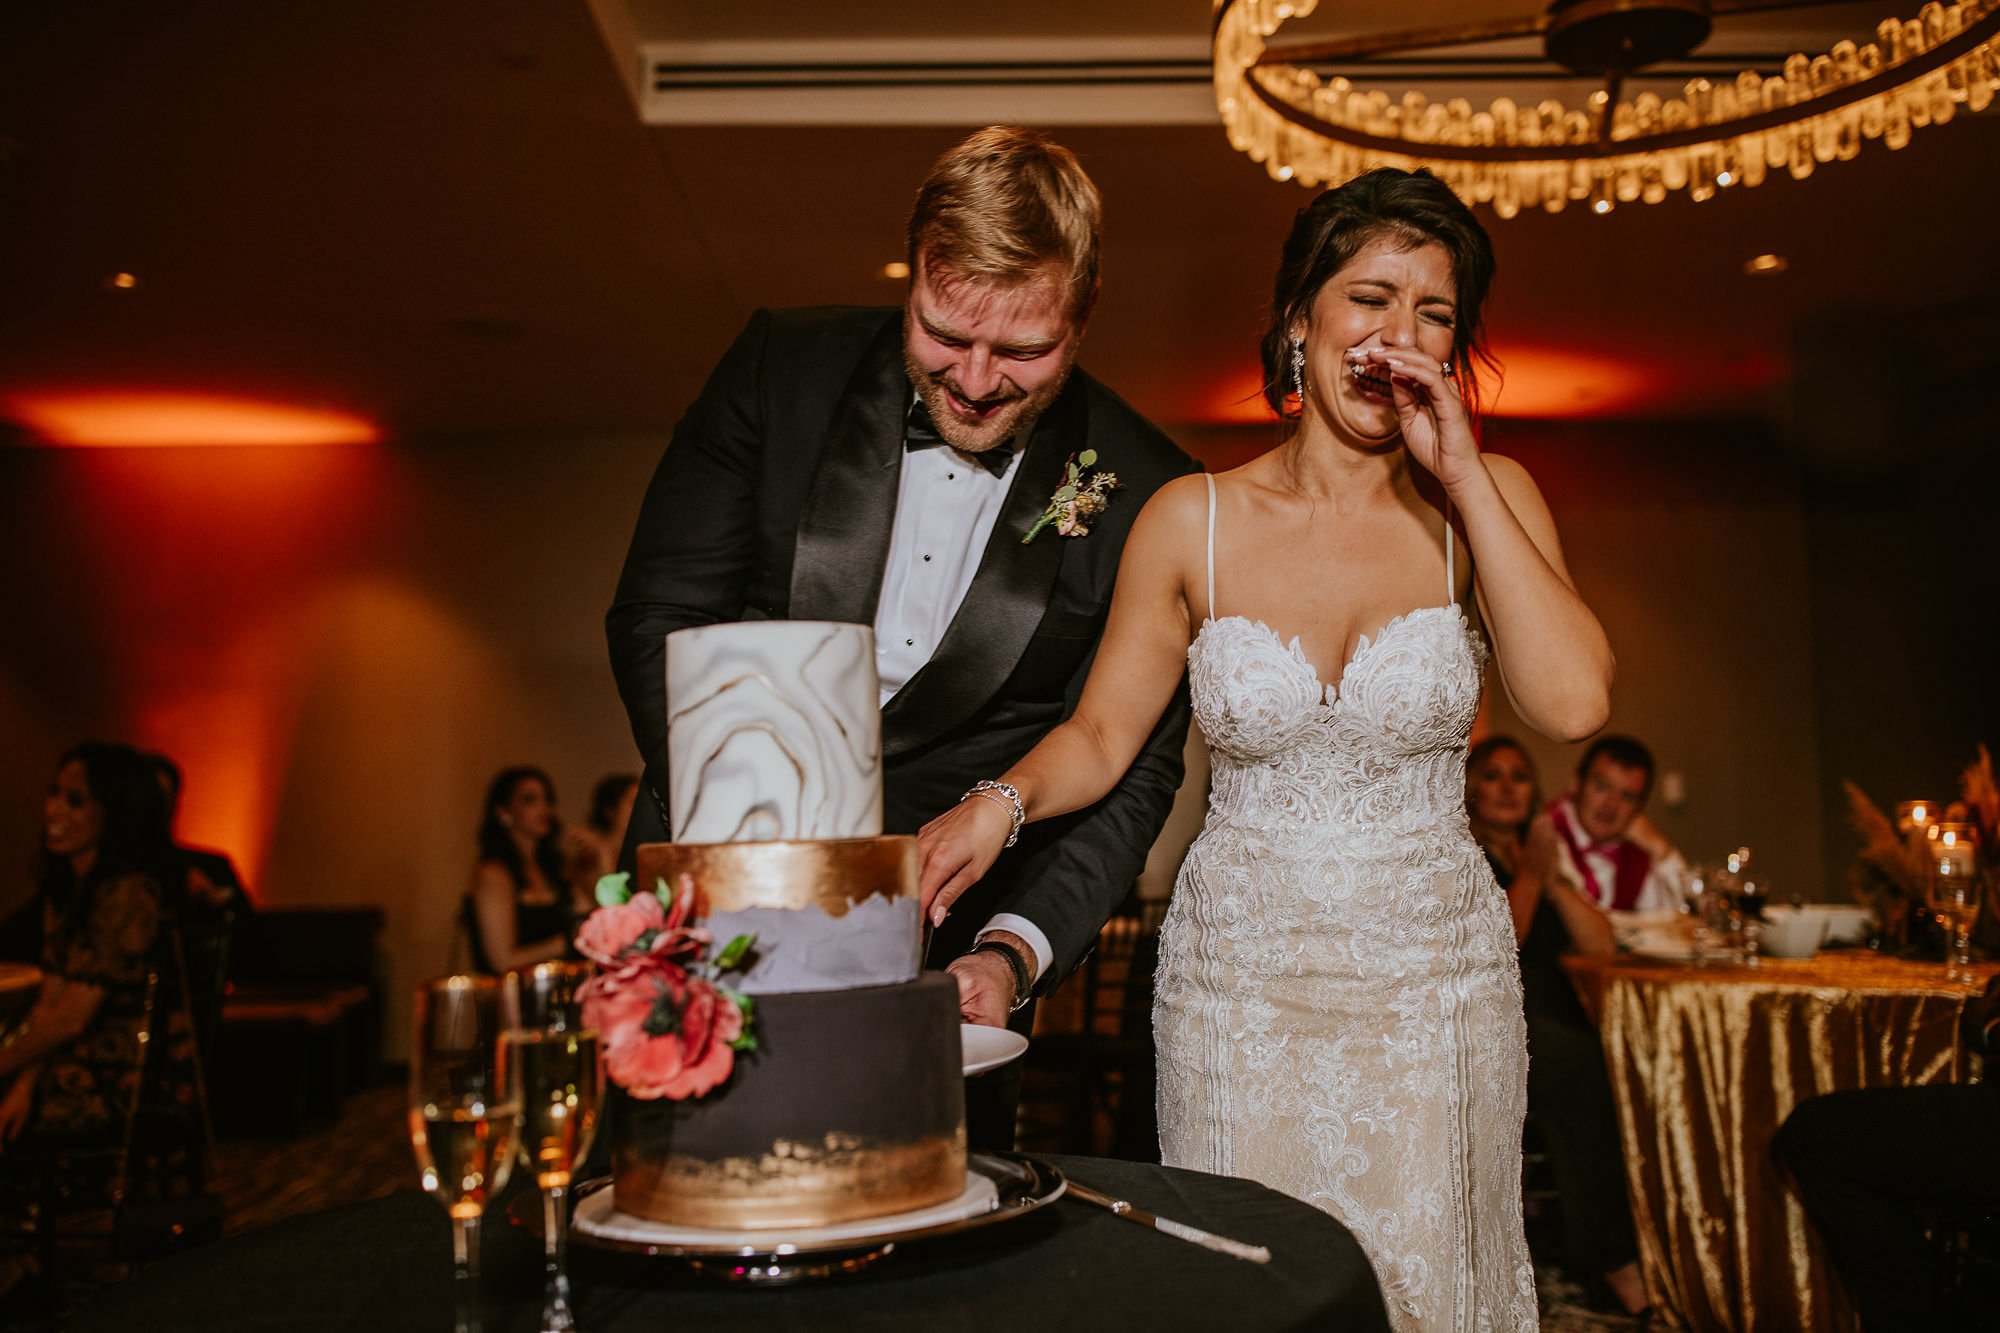 Laughing while cutting the cake